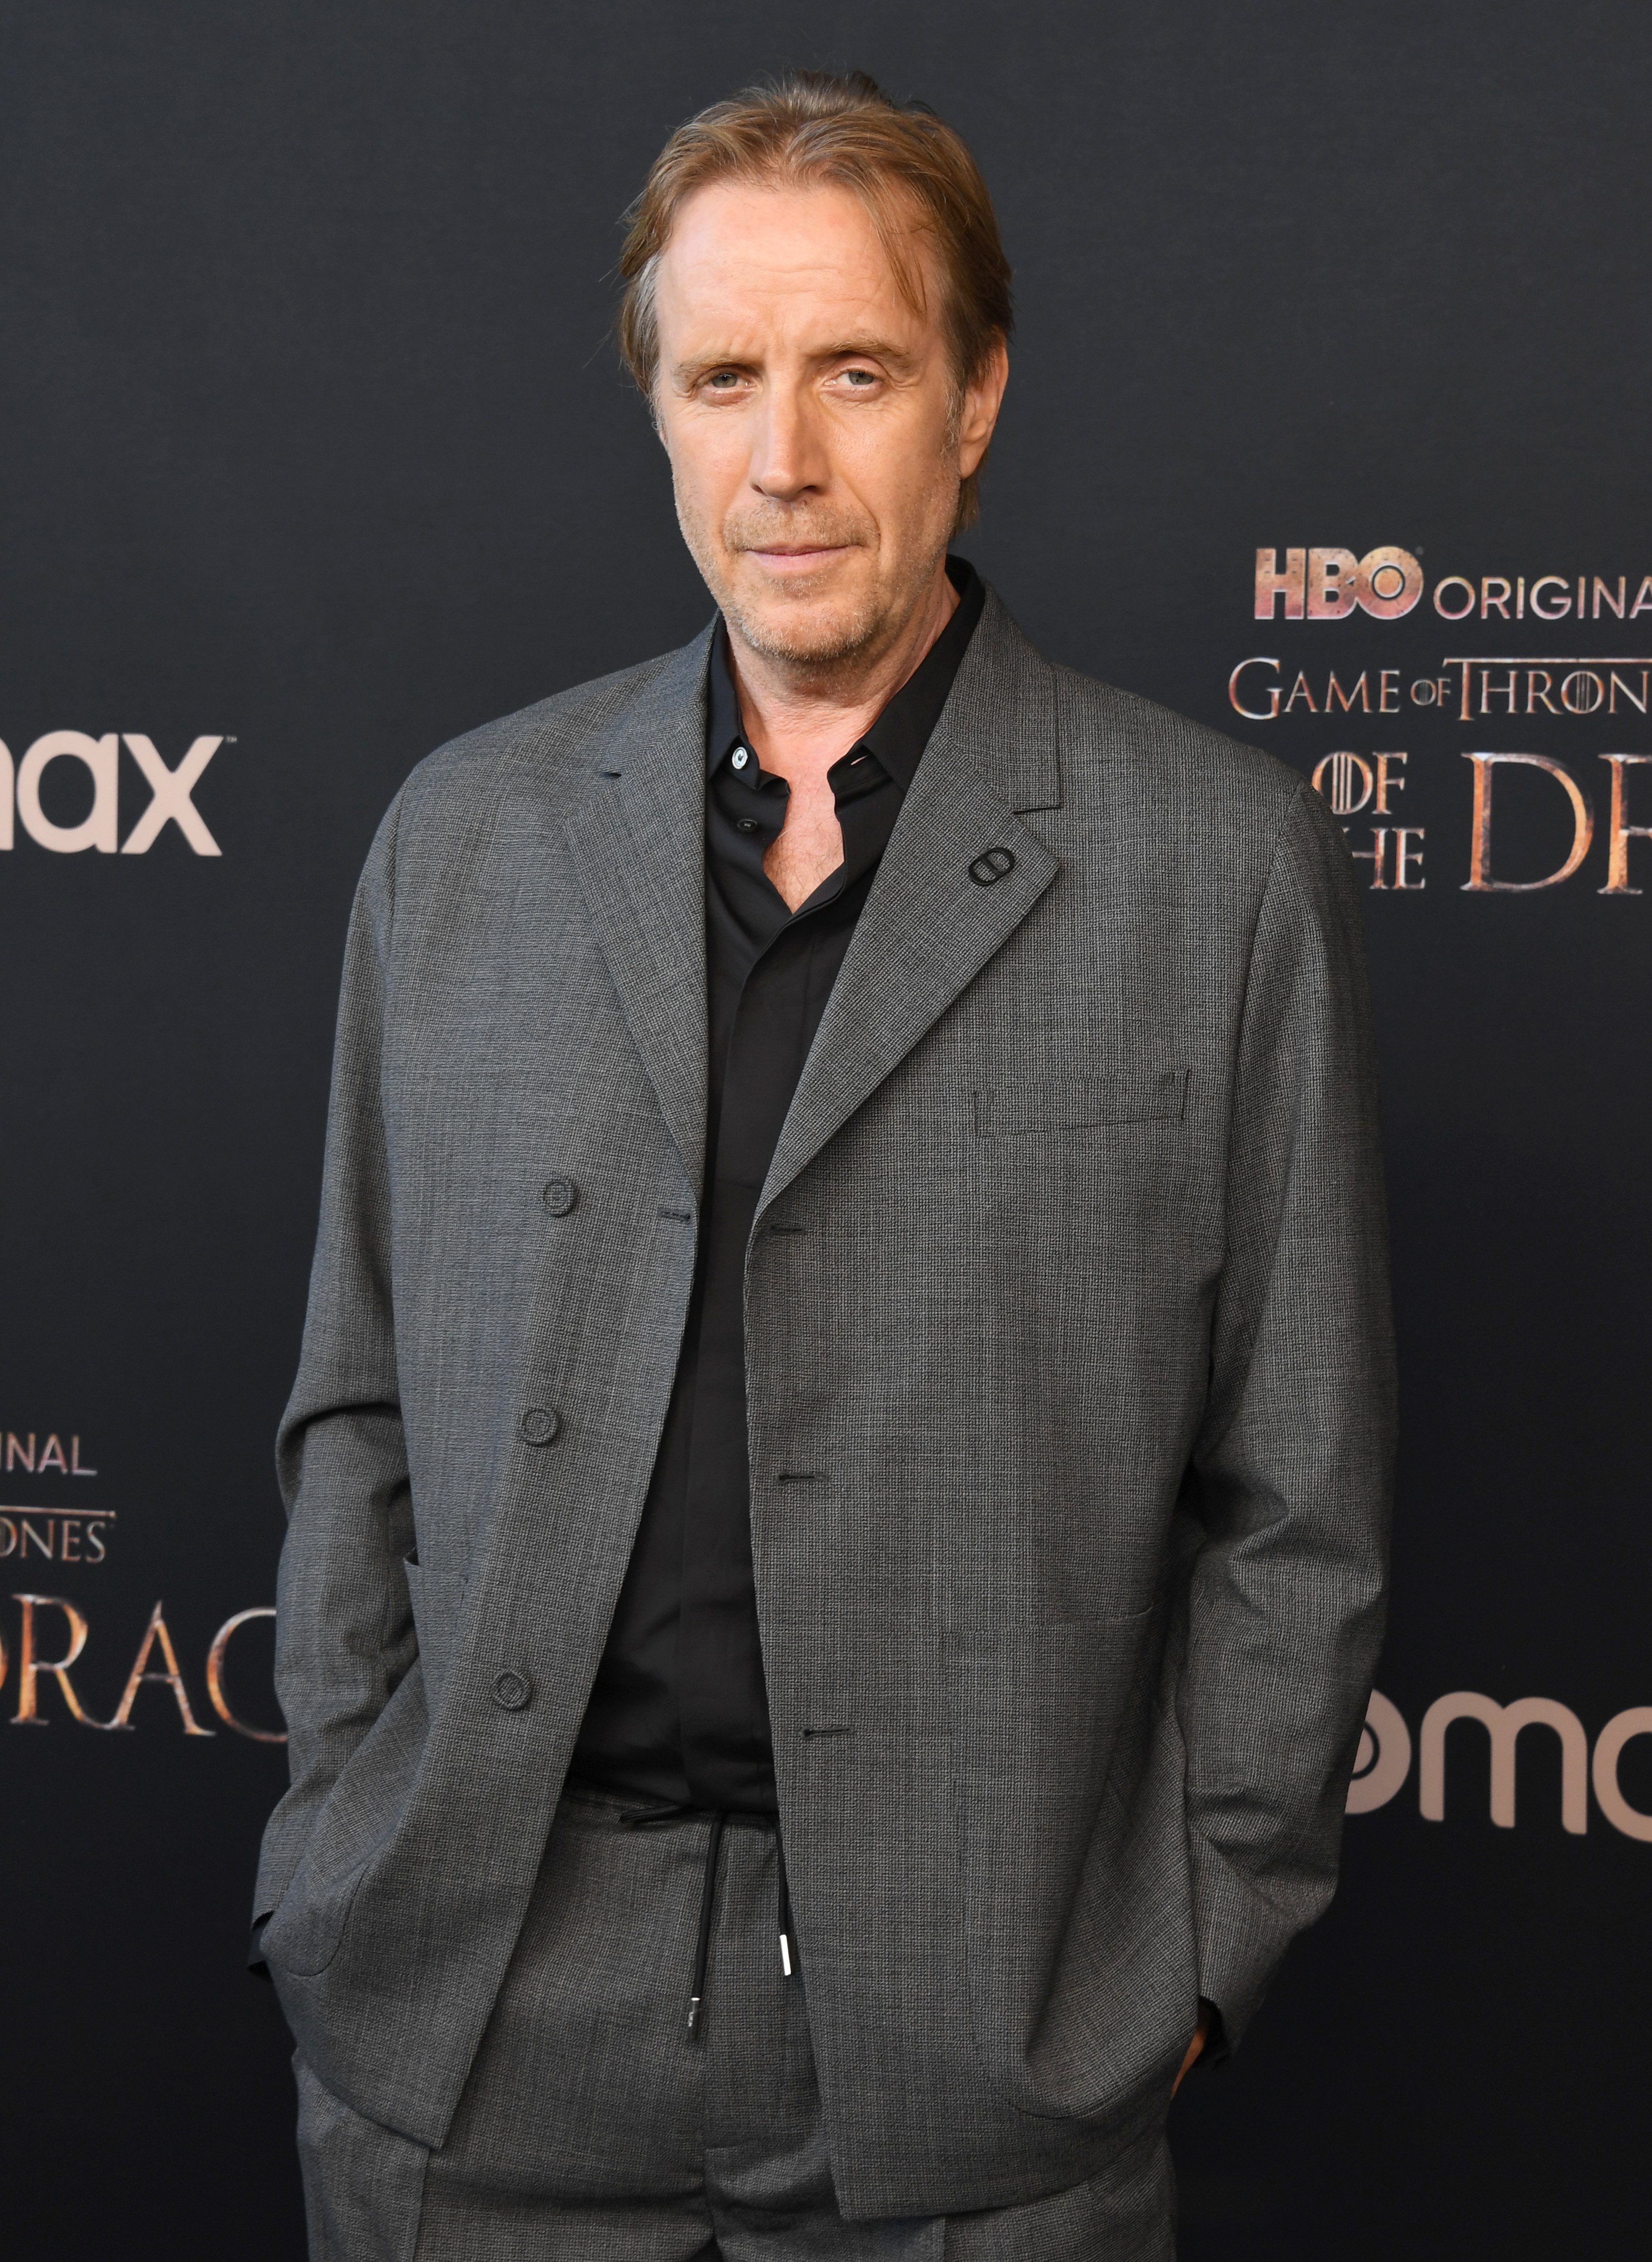 Rhys Ifans at the Los Angeles premiere of "House Of The Dragon" on July 27, 2022 | Source: Getty Images